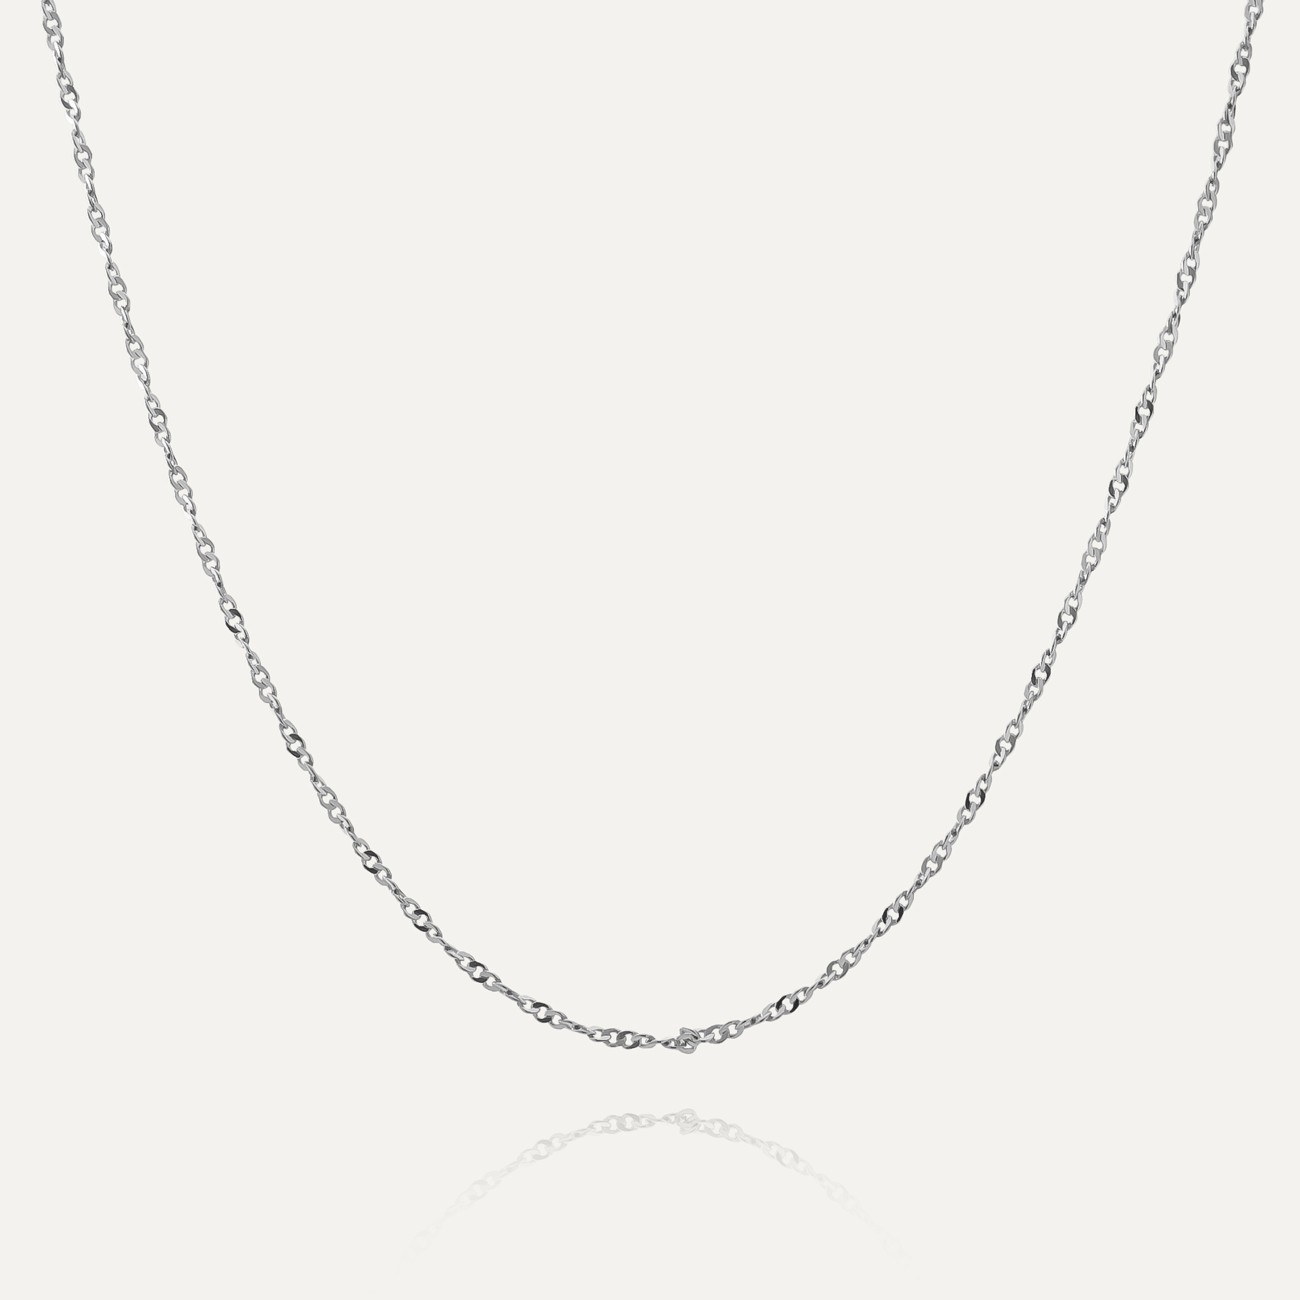 Snake chain sterling silver 925